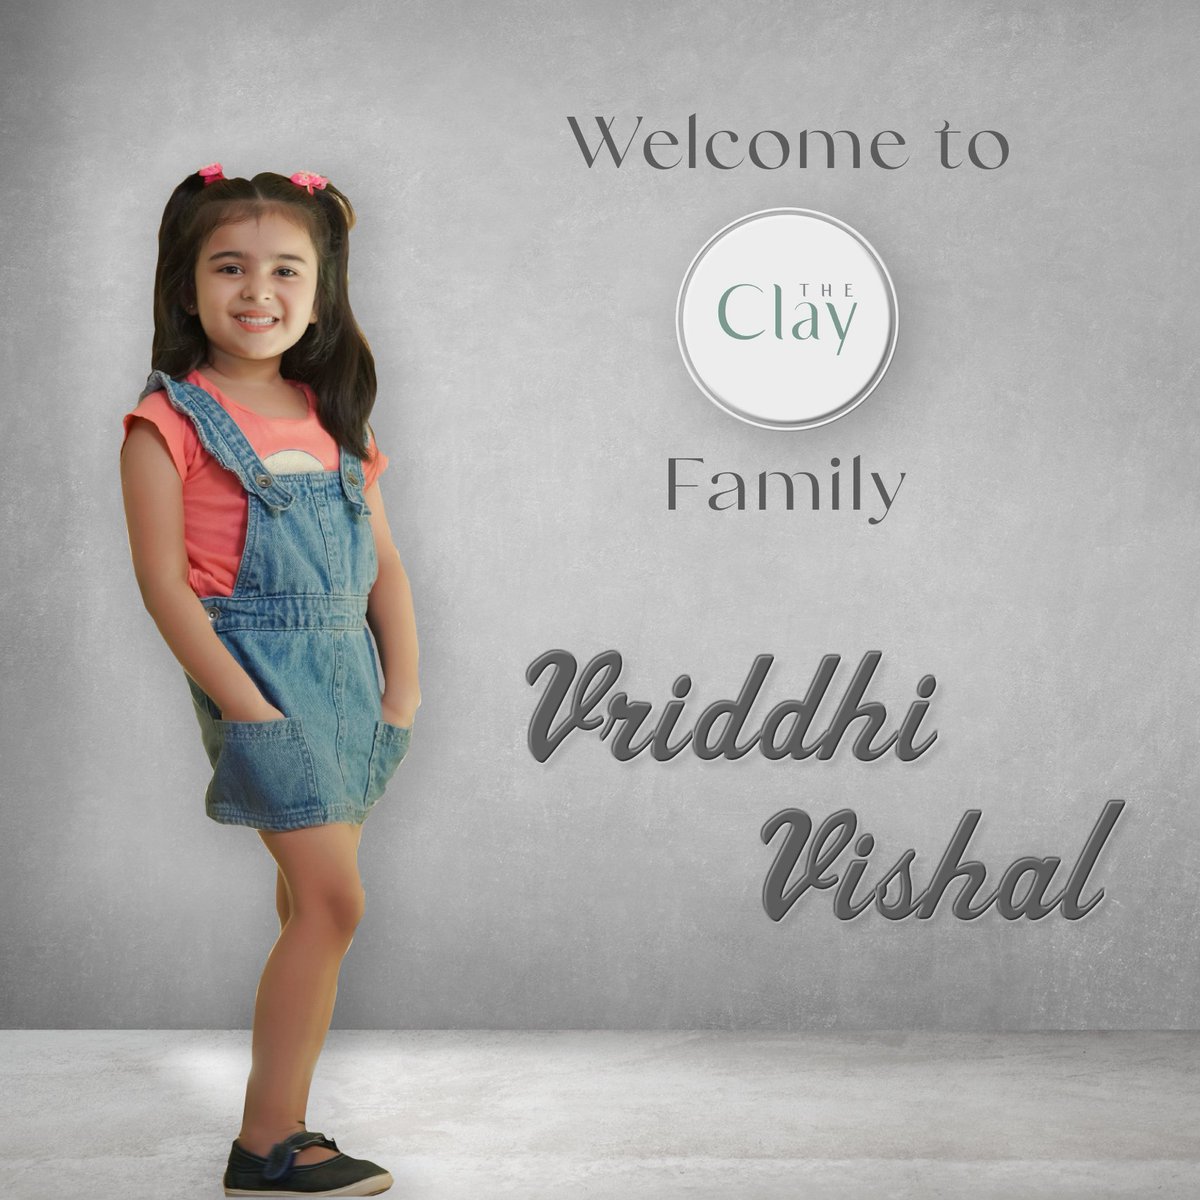 We are Happy To Welcome the trending Kid @VriddhiVishal to our @theclay19 Family #vriddhivishal #trend #vaathicoming #brandpromotions #movies #alluarjun #thalapathy